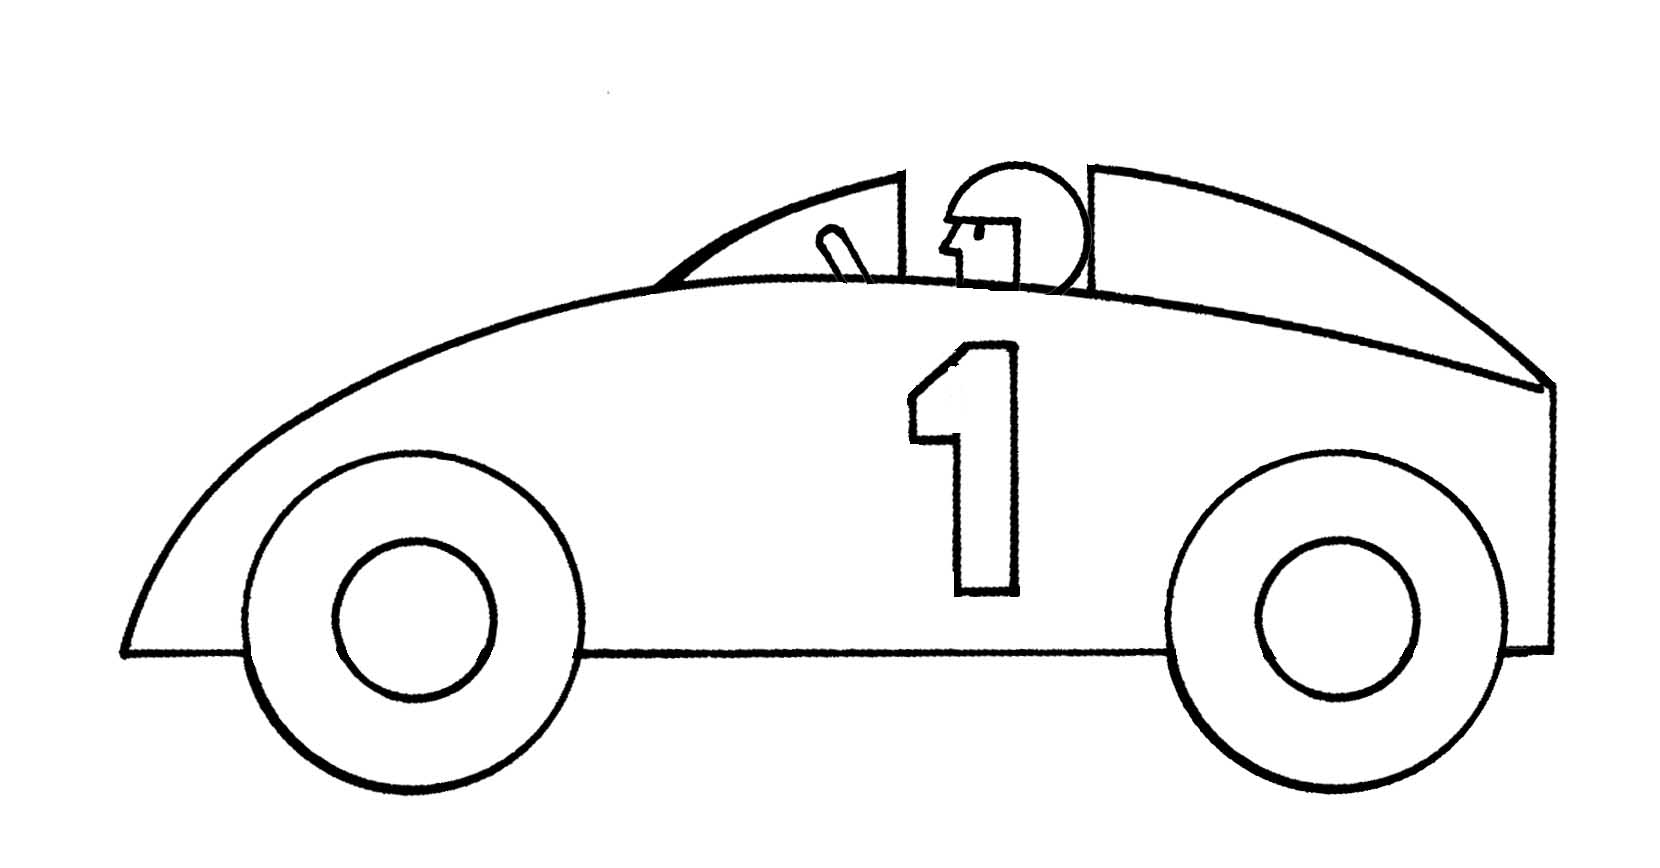 Kids car drawing clipart